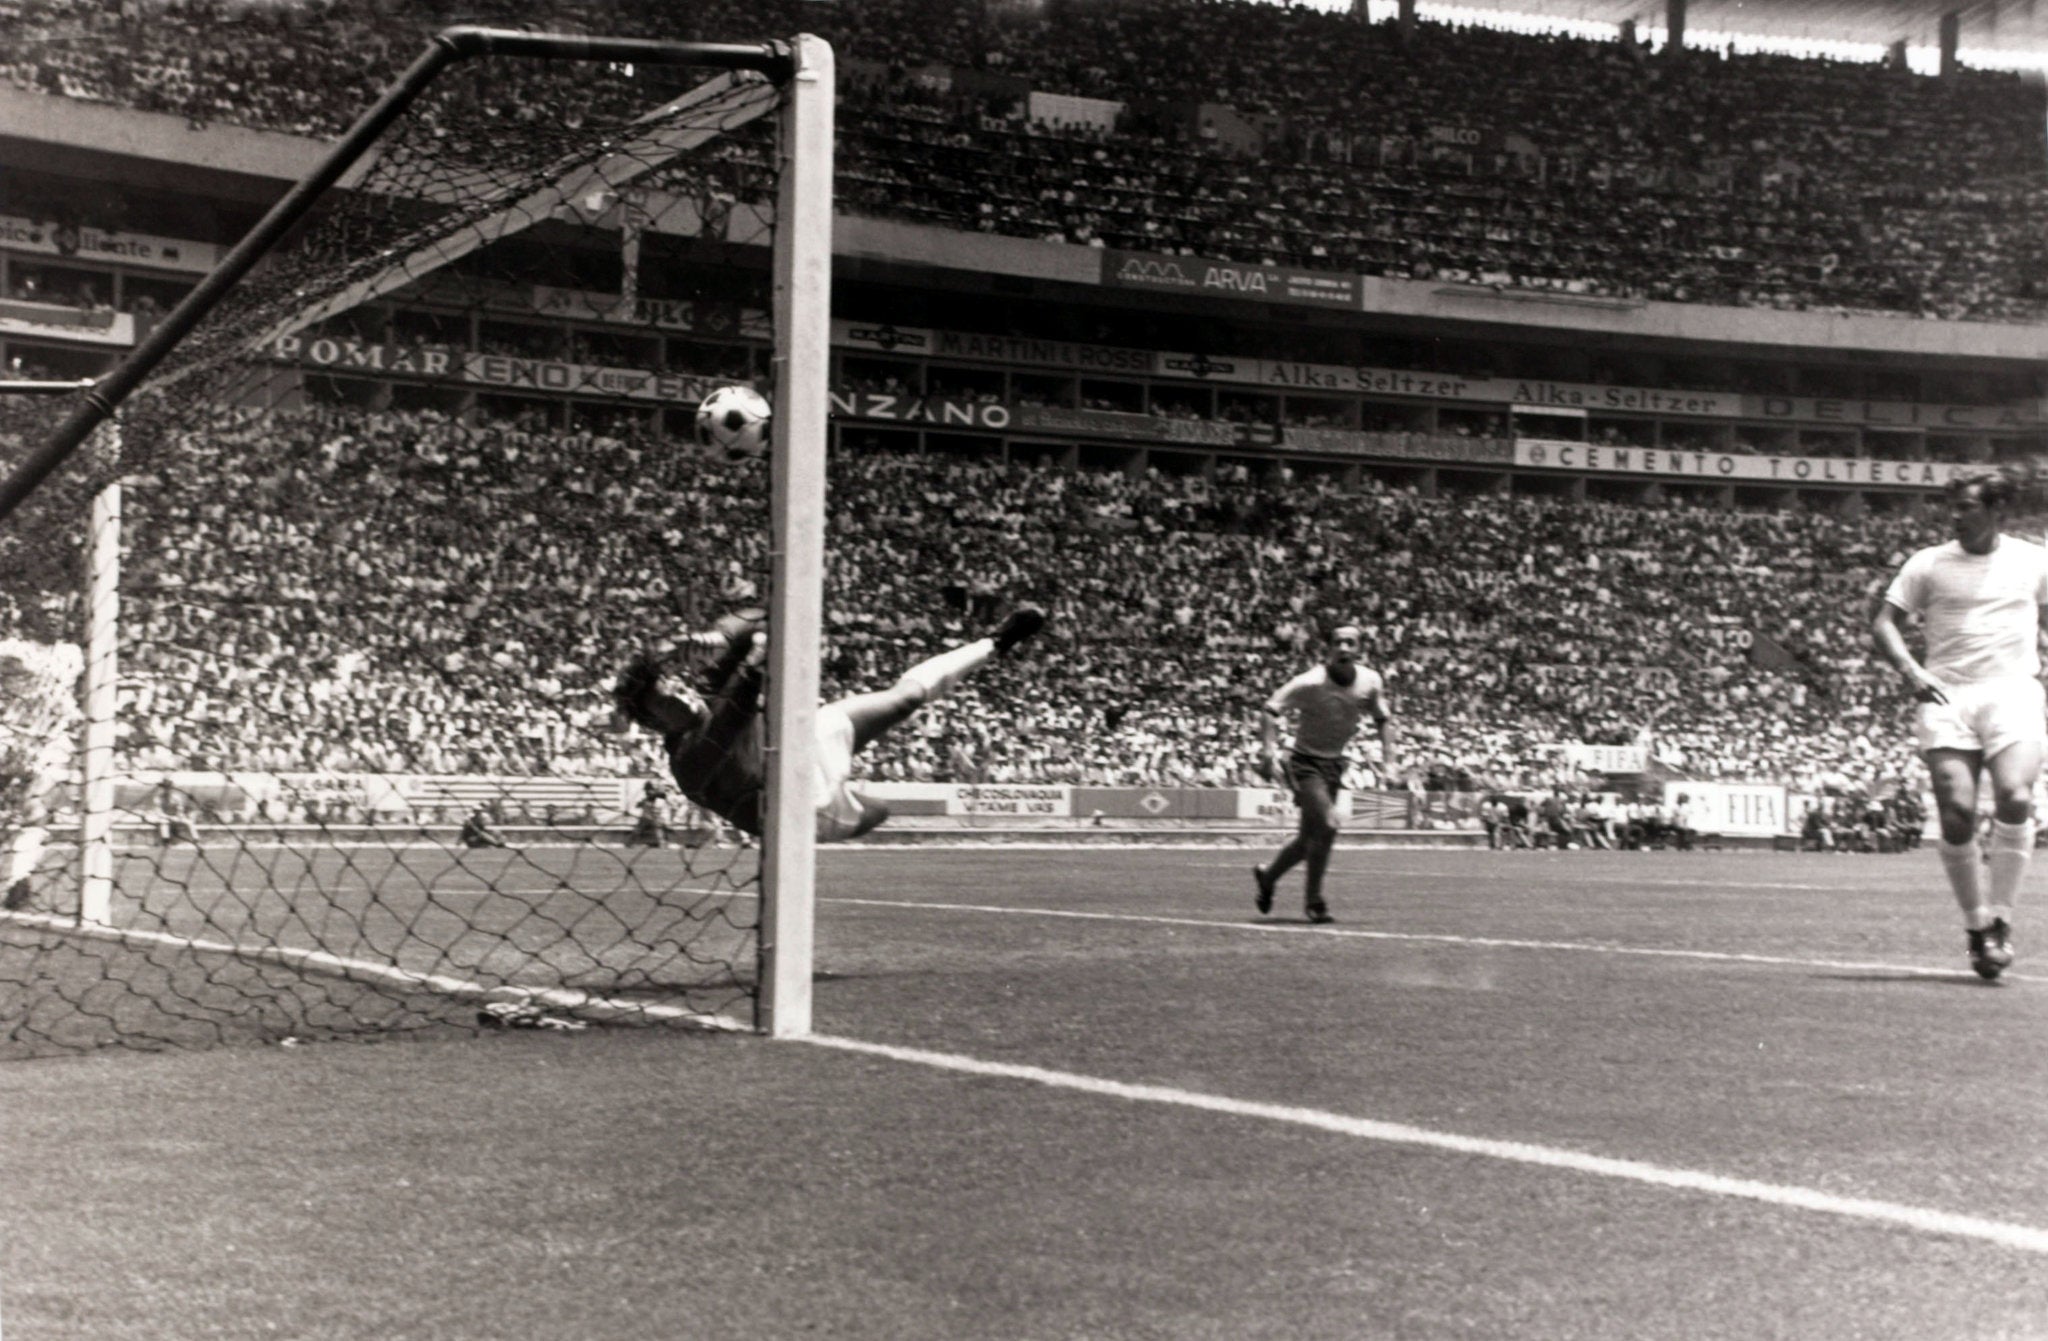 TOP 10 WORLD CUP MEMORIES OF ALL TIME - NUMBER 8 - BANK ON GORDON TO MAKE THE SAVE